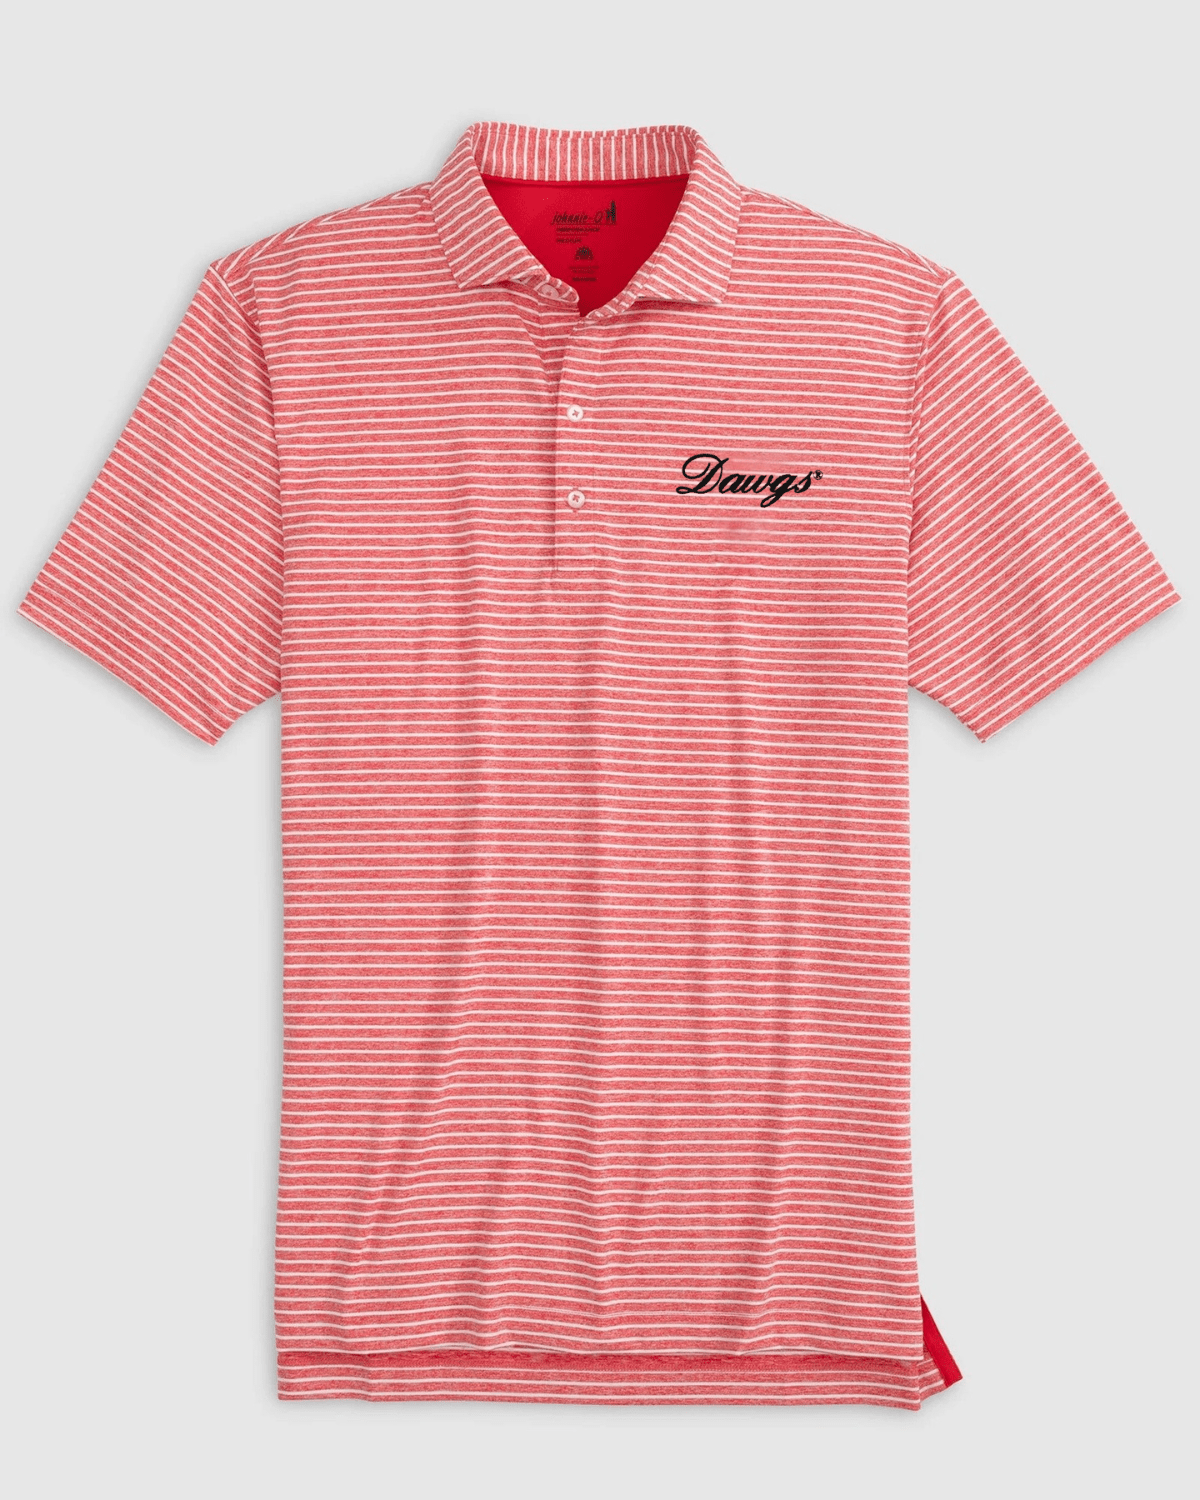 JOHNNIE-O GAMEDAY - UNIVERSITY OF GEORGIA - POLOS RED / S DAWGS CLIPPER